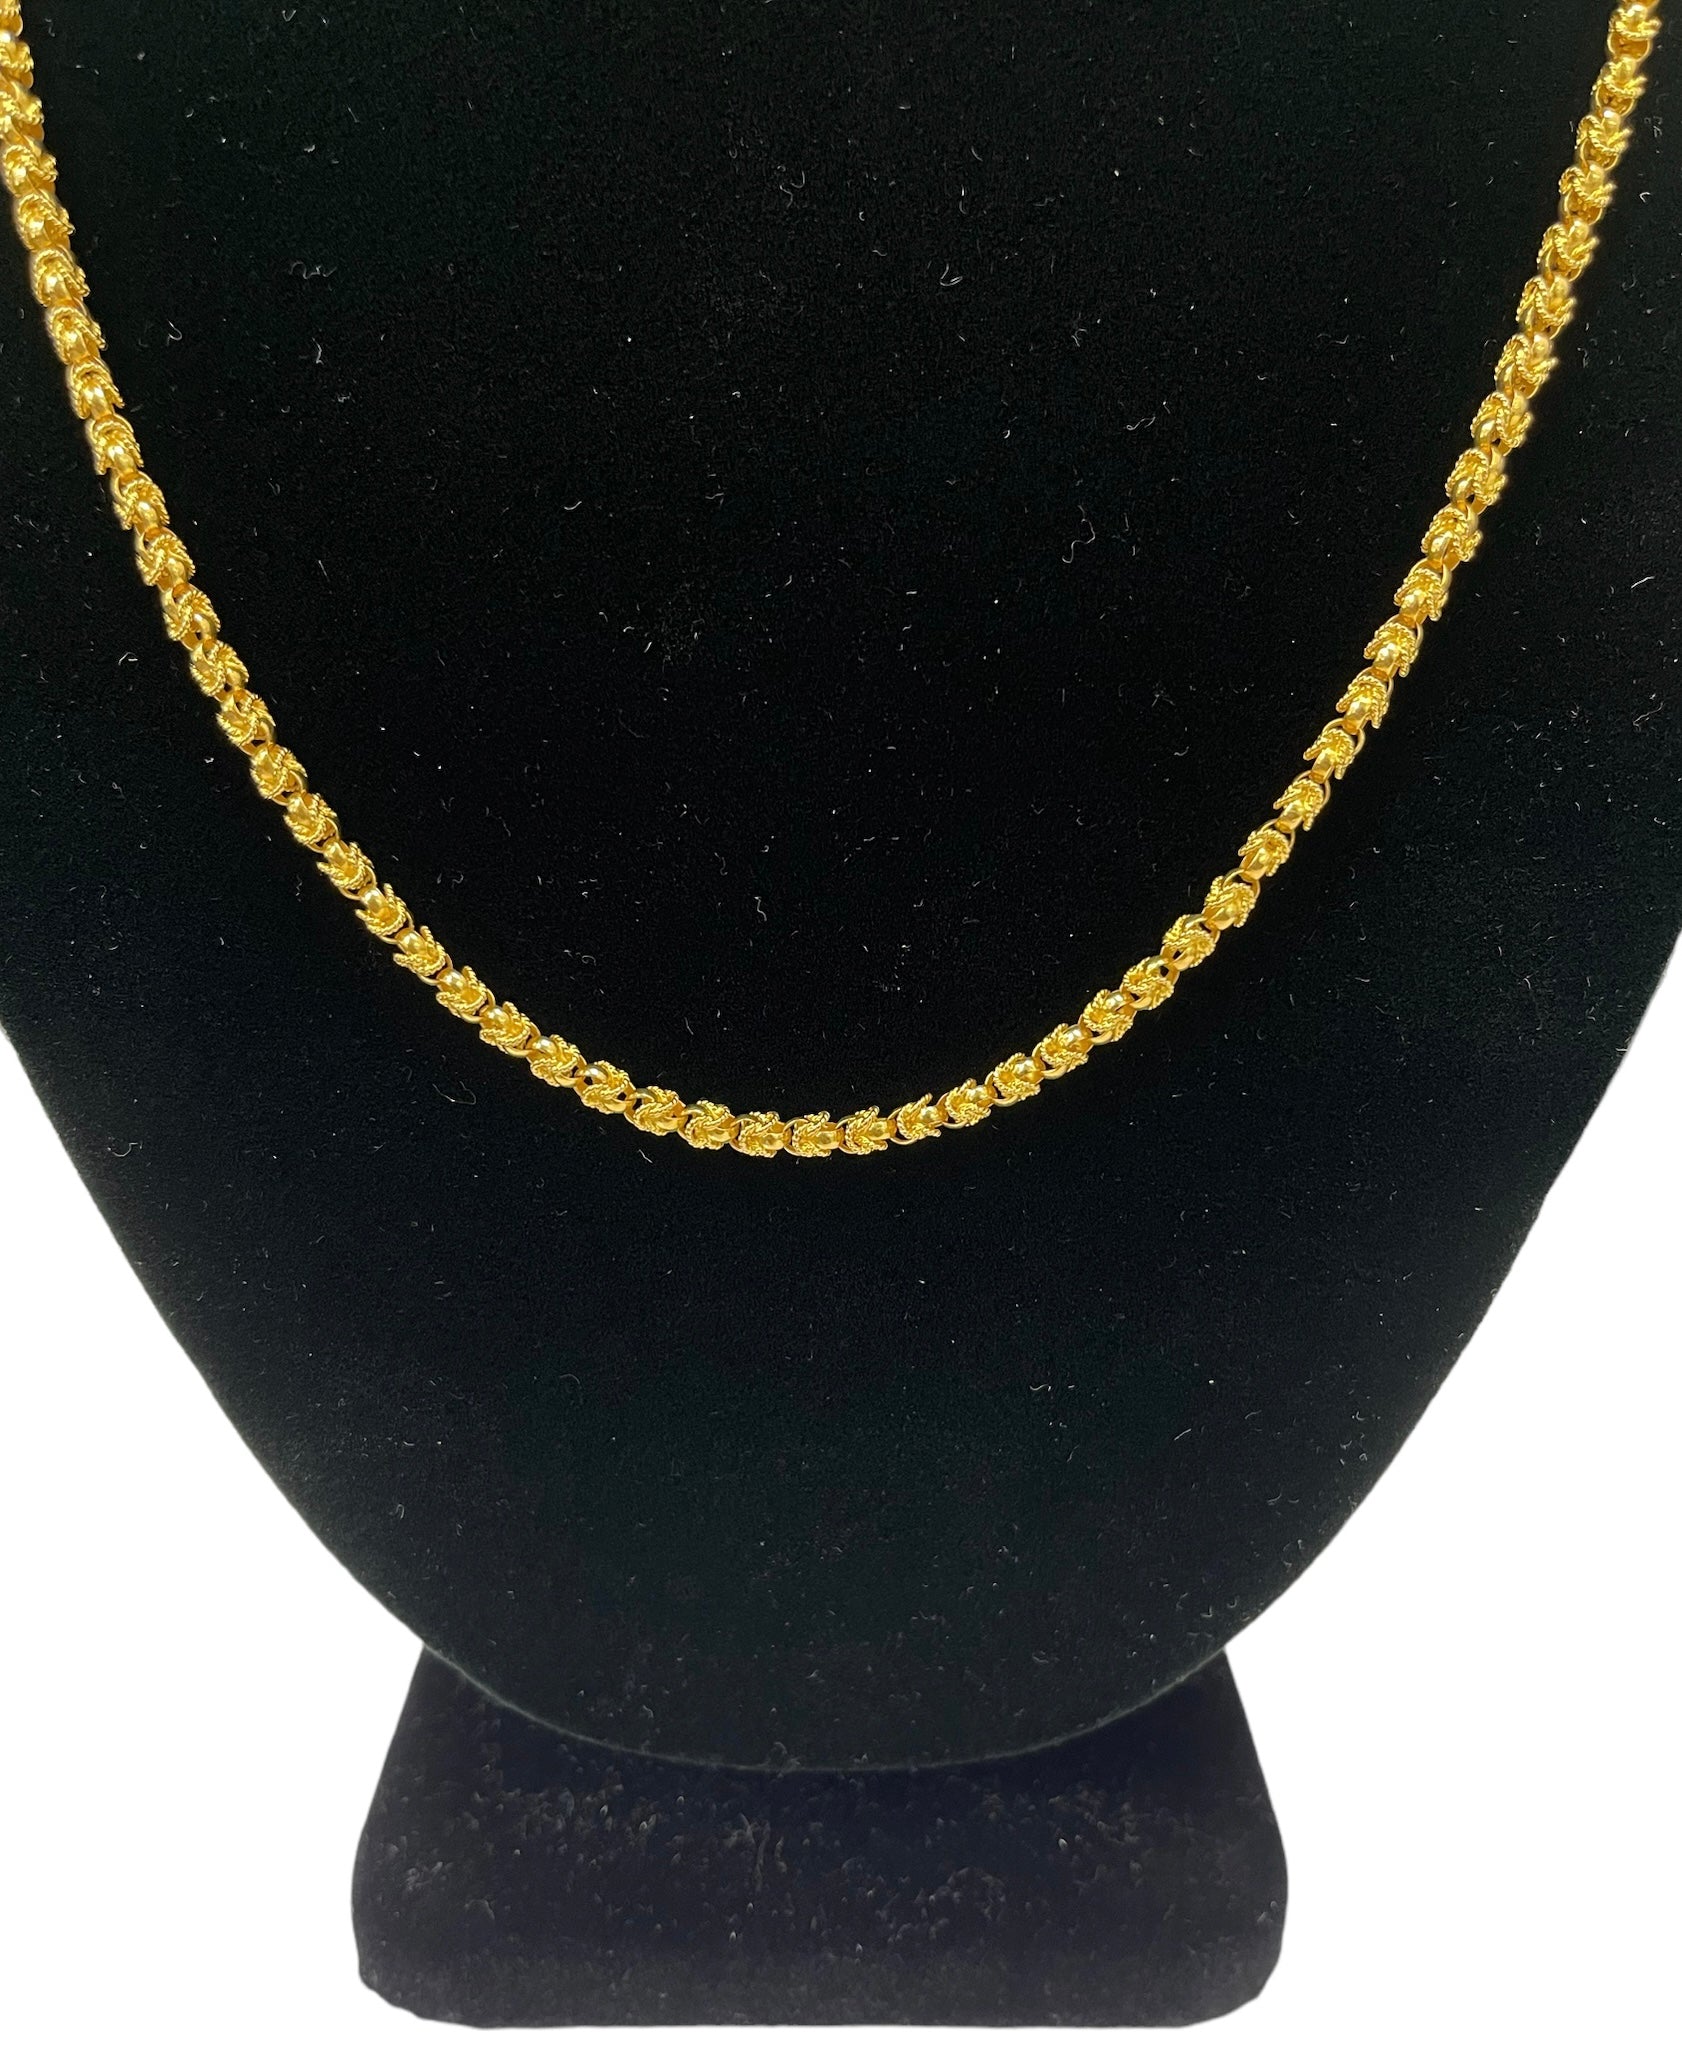 Flower Bud Yellow Gold Necklace Chain 21" Solid 18kt